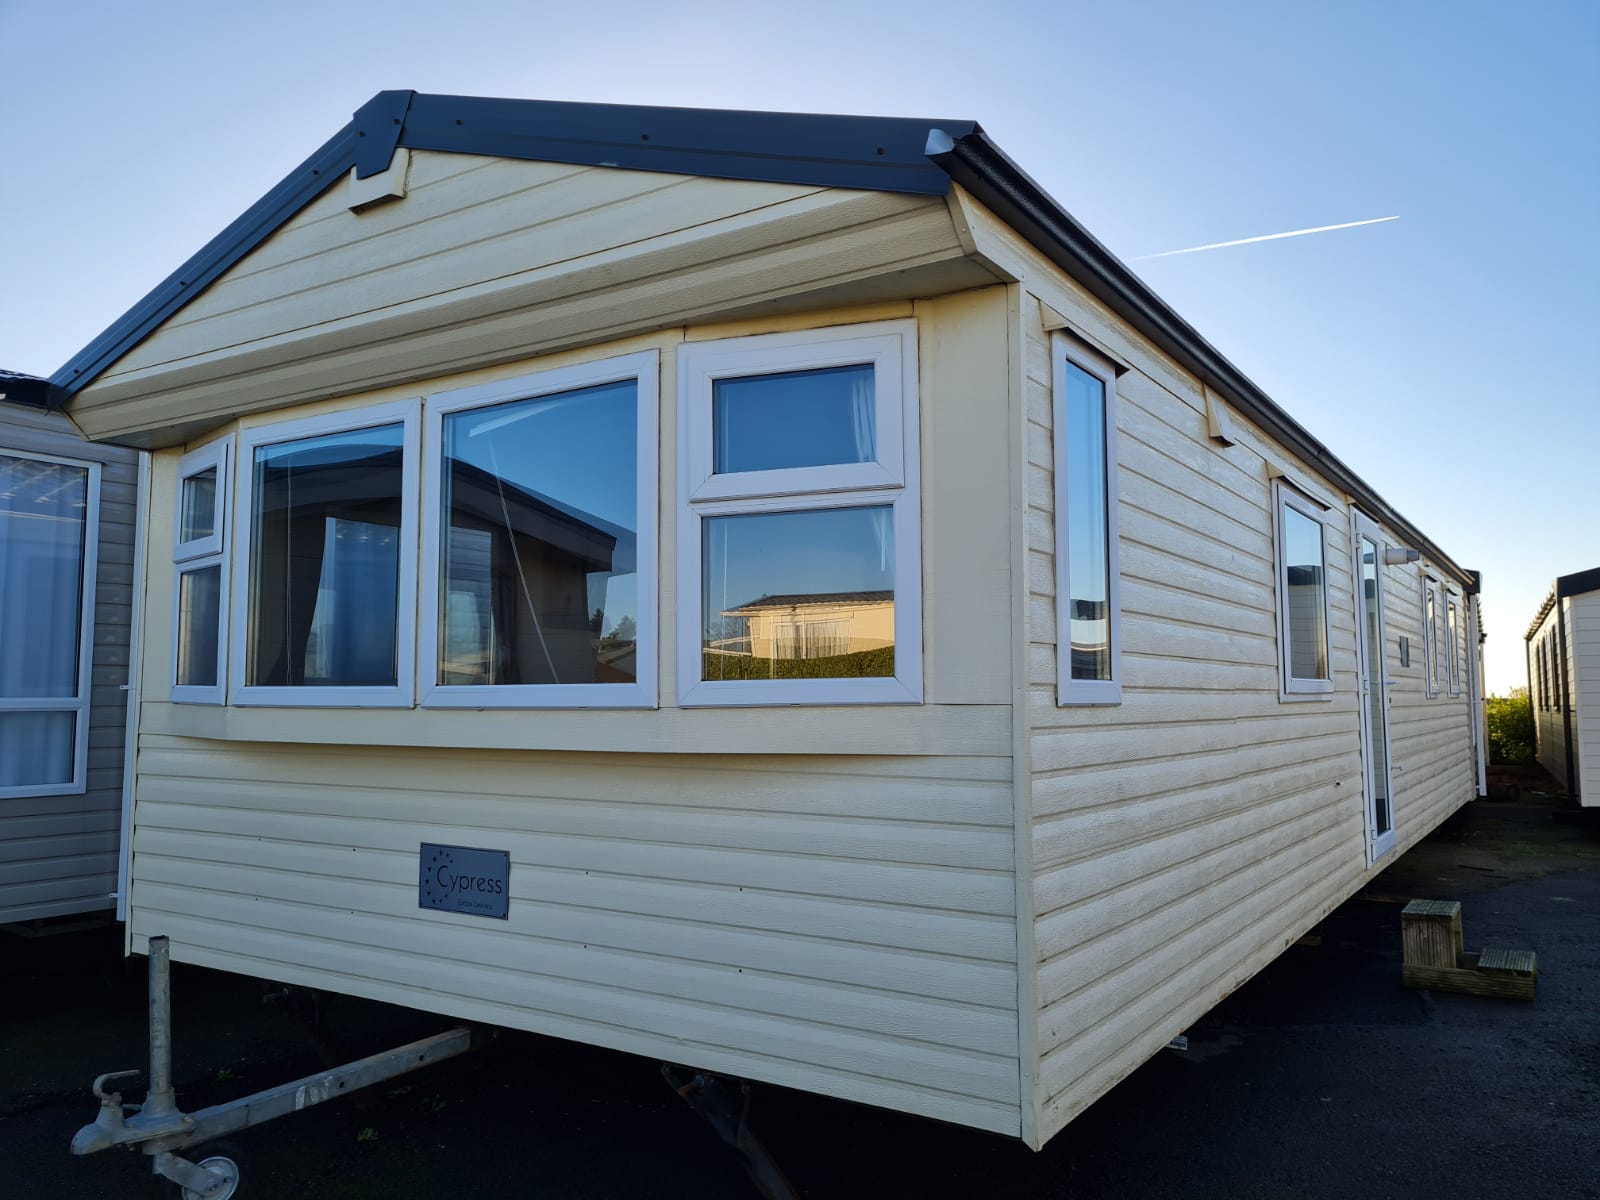 Outside view of a cream coloured mobile home